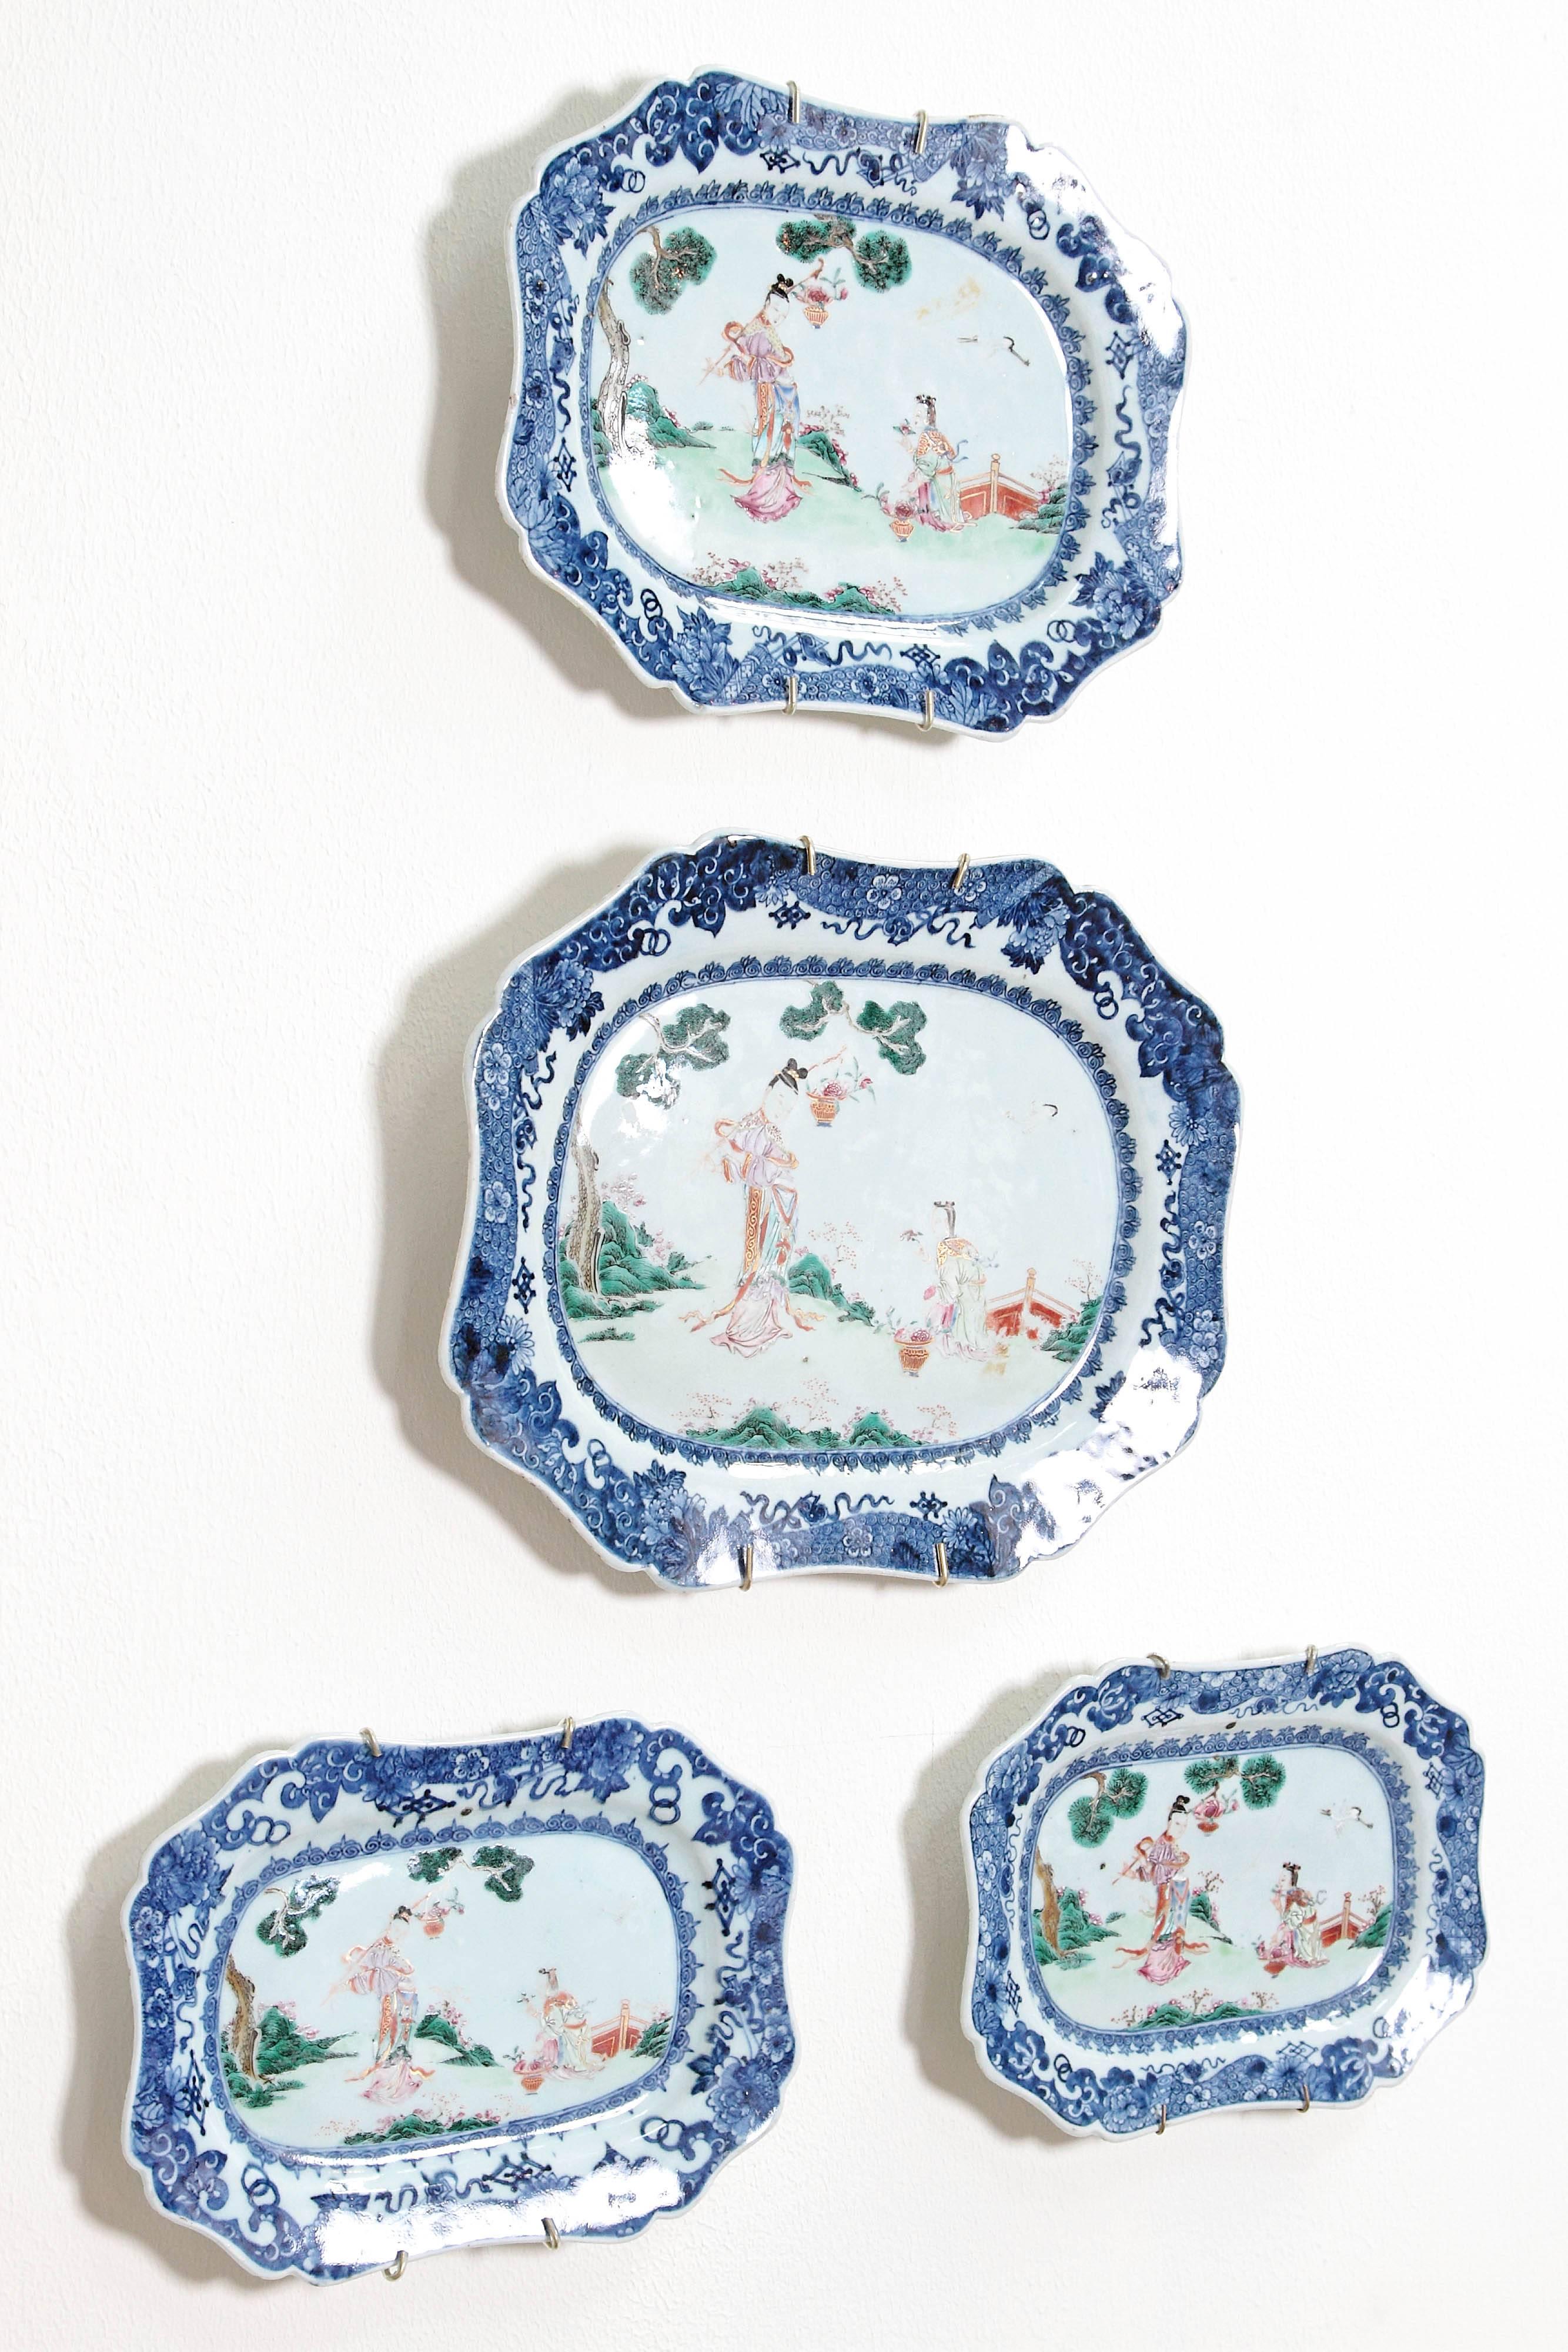 18th Century Chinese Export Porcelain Platters